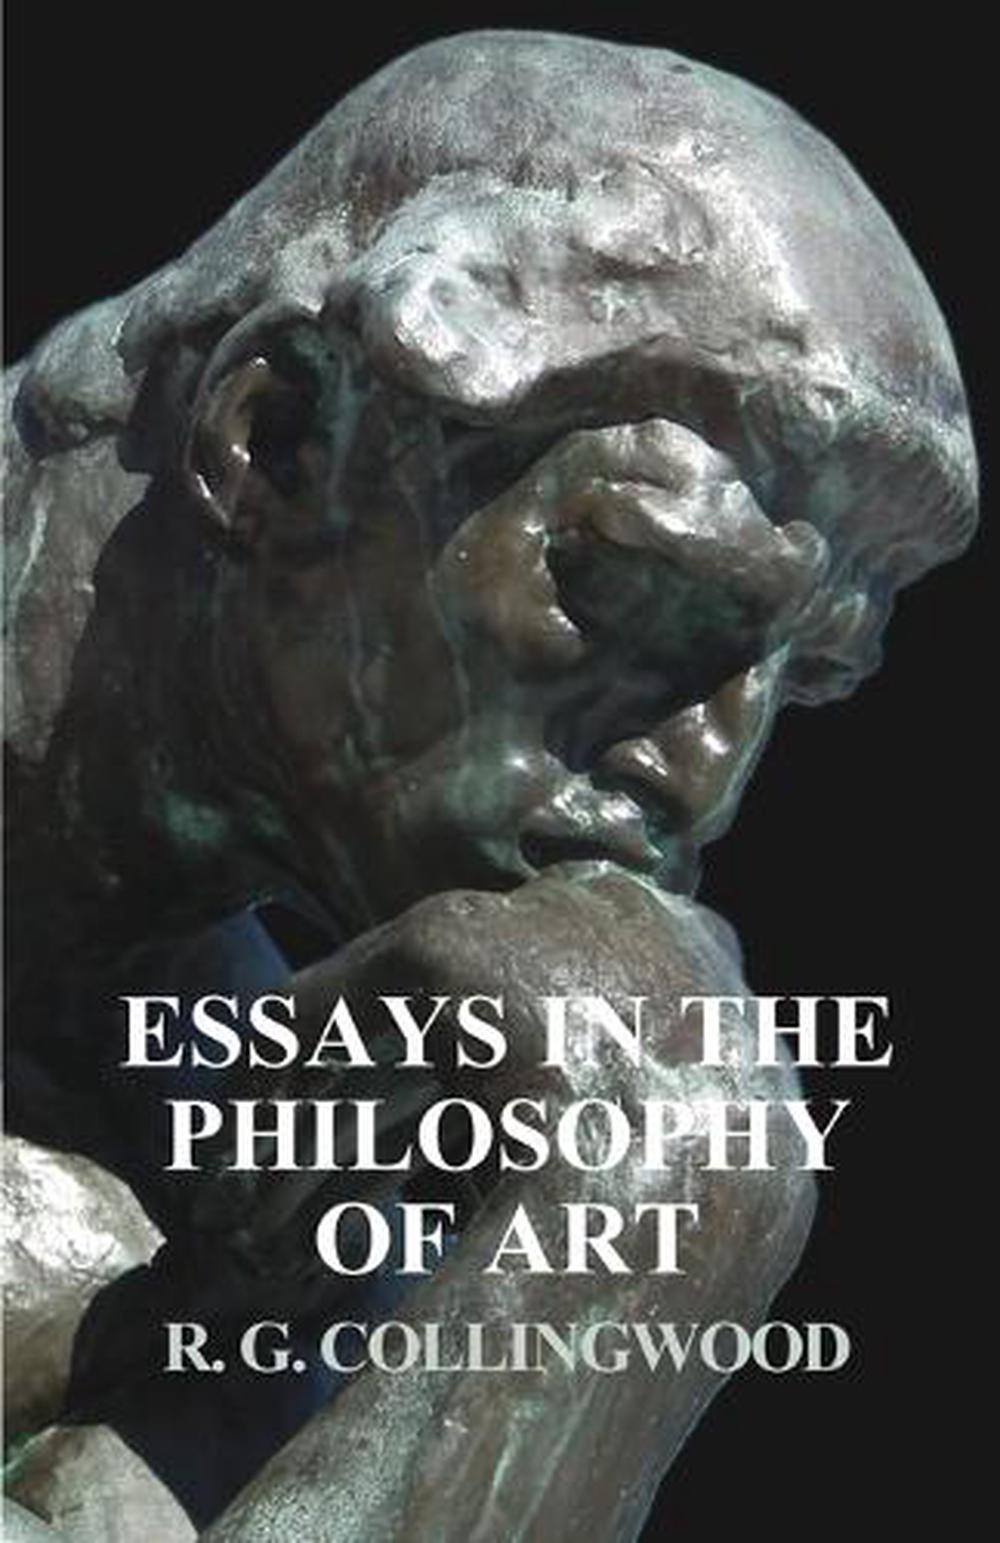 philosophy and art new essays at the intersection